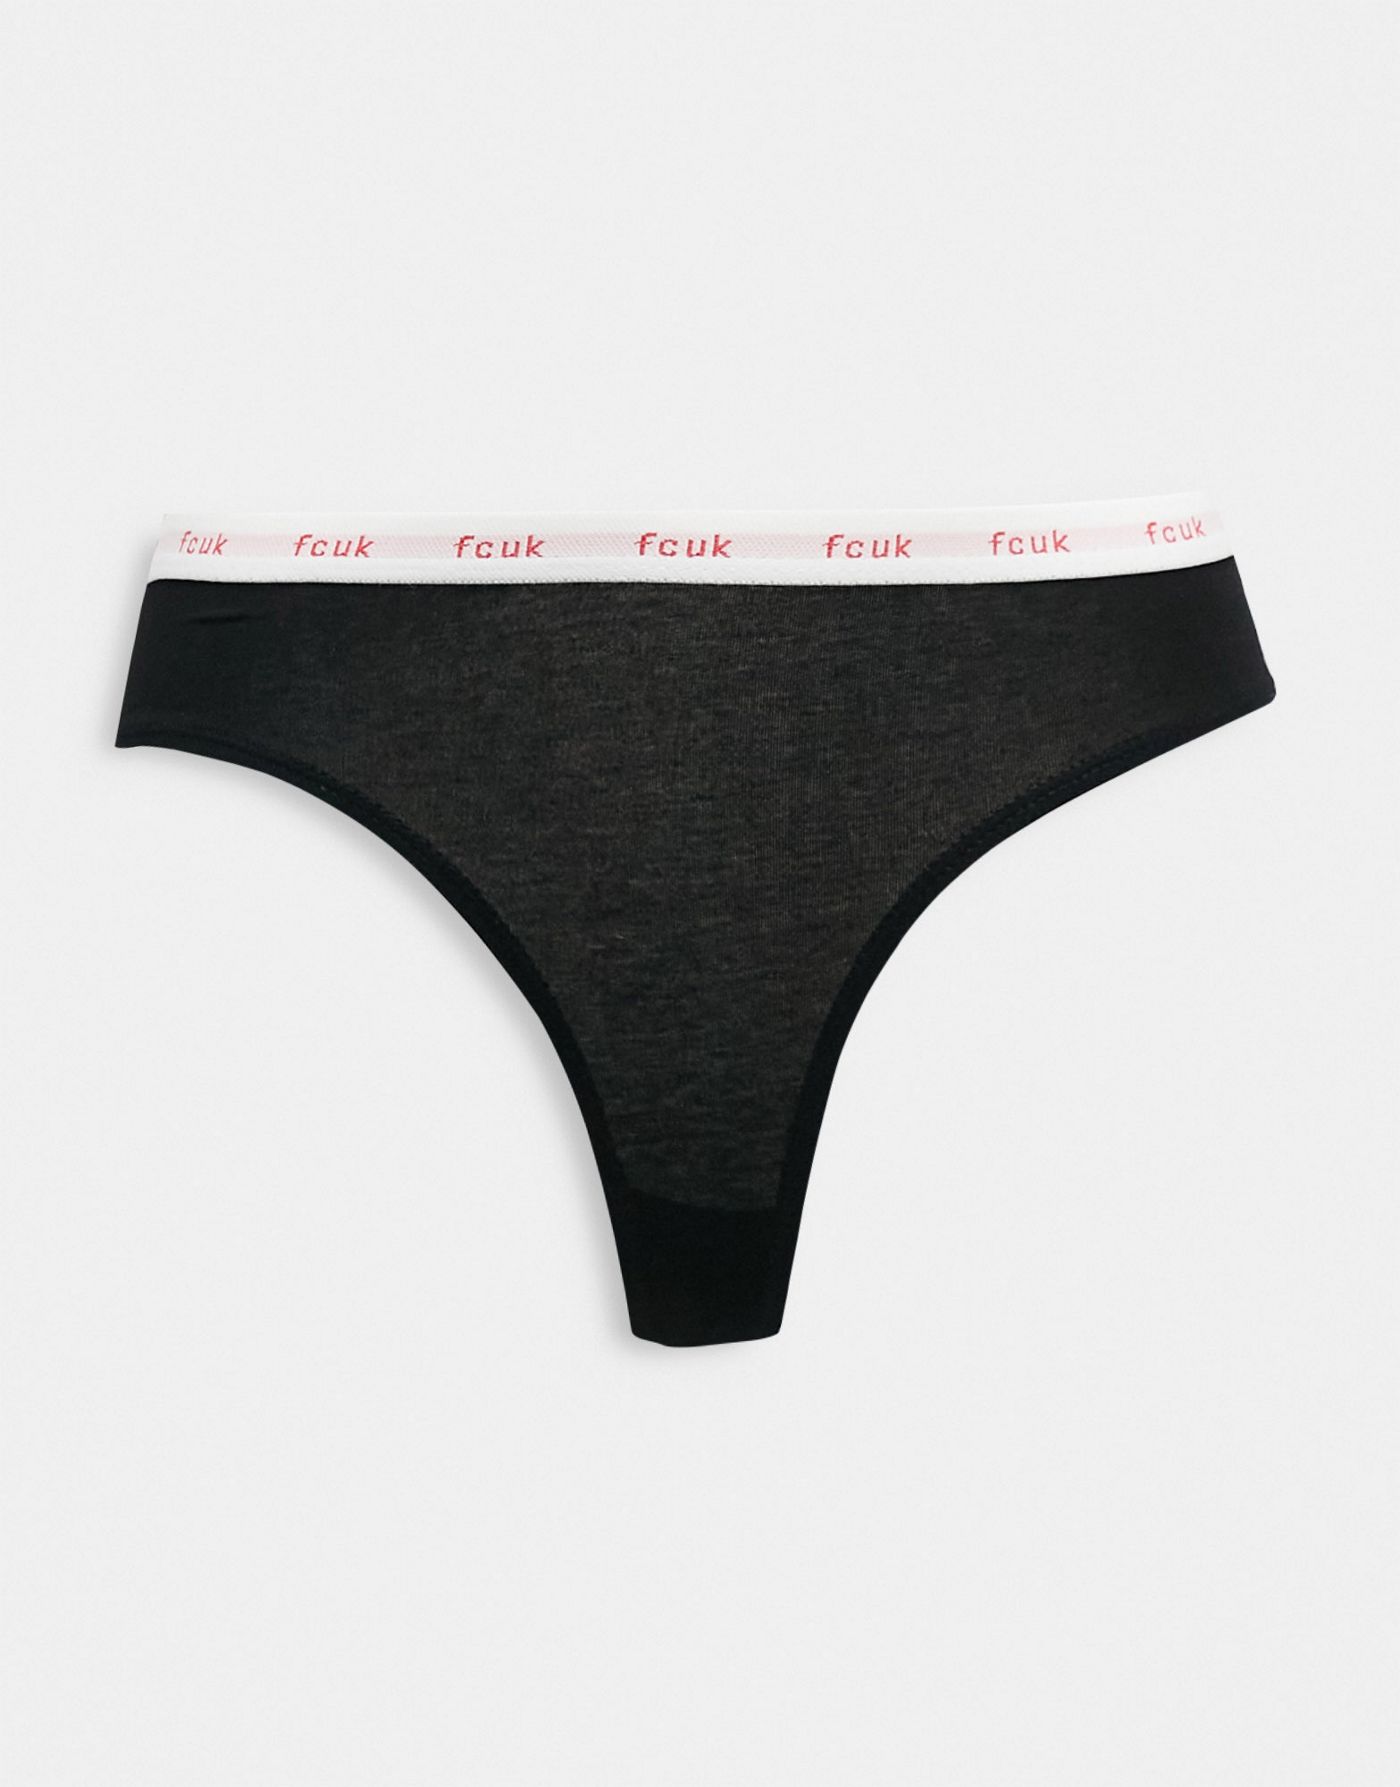 FCUK 3 pack thongs in black, white and hibiscus